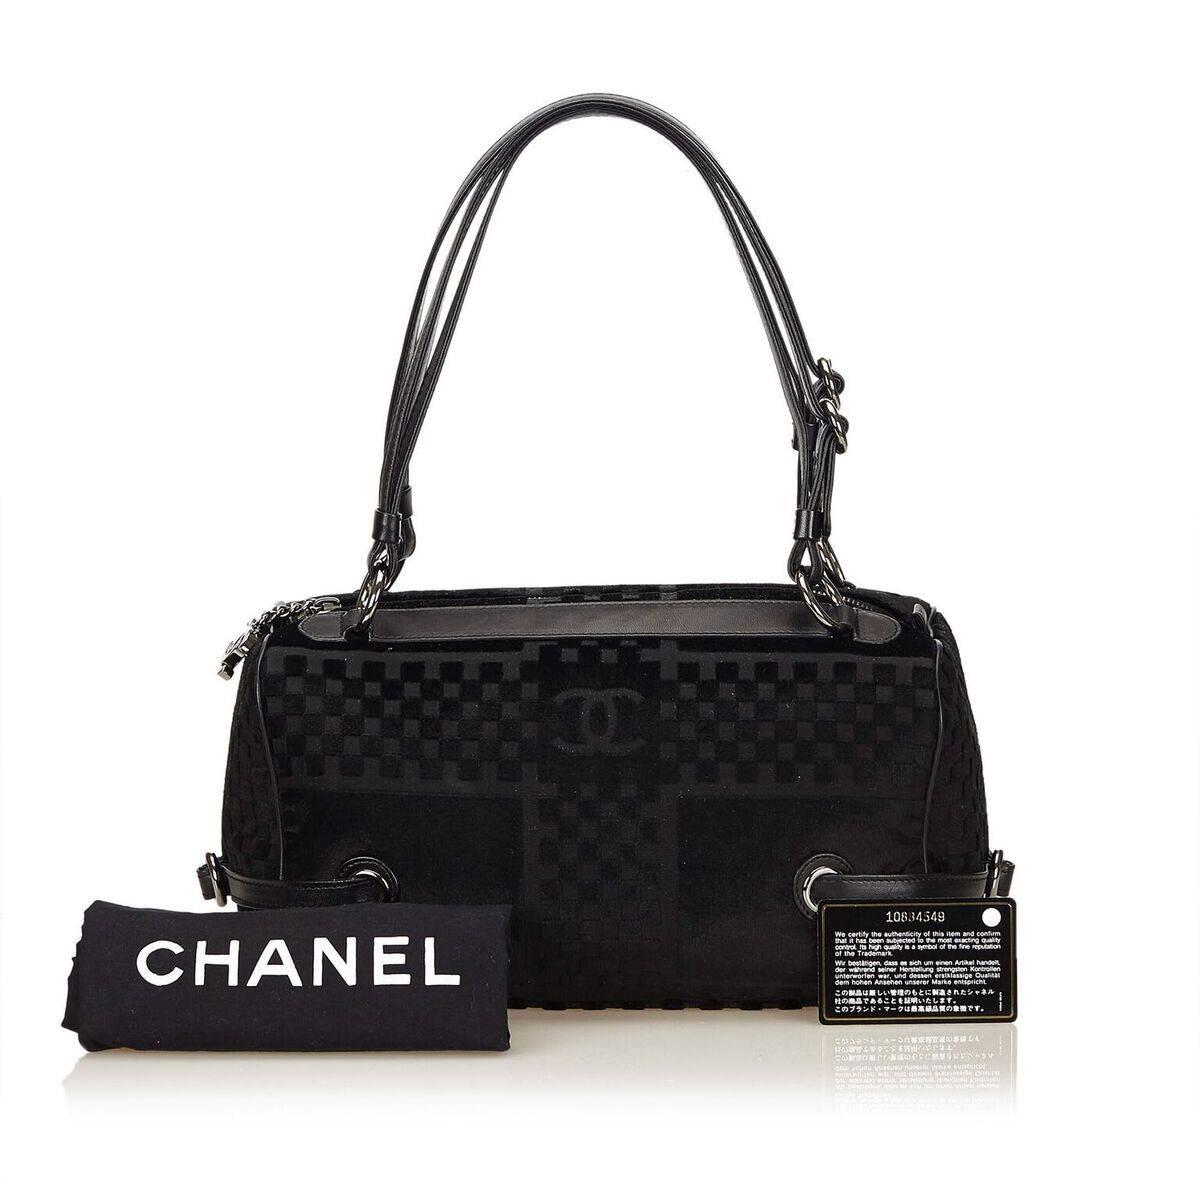 Product details:  Black velour shoulder bag by Chanel.  Trimmed with leather.  Dual shoulder straps.  Top zip closure.  Lined interior with inner zip pocket.  Silvertone hardware.  Authenticity card and dust bag included.  12